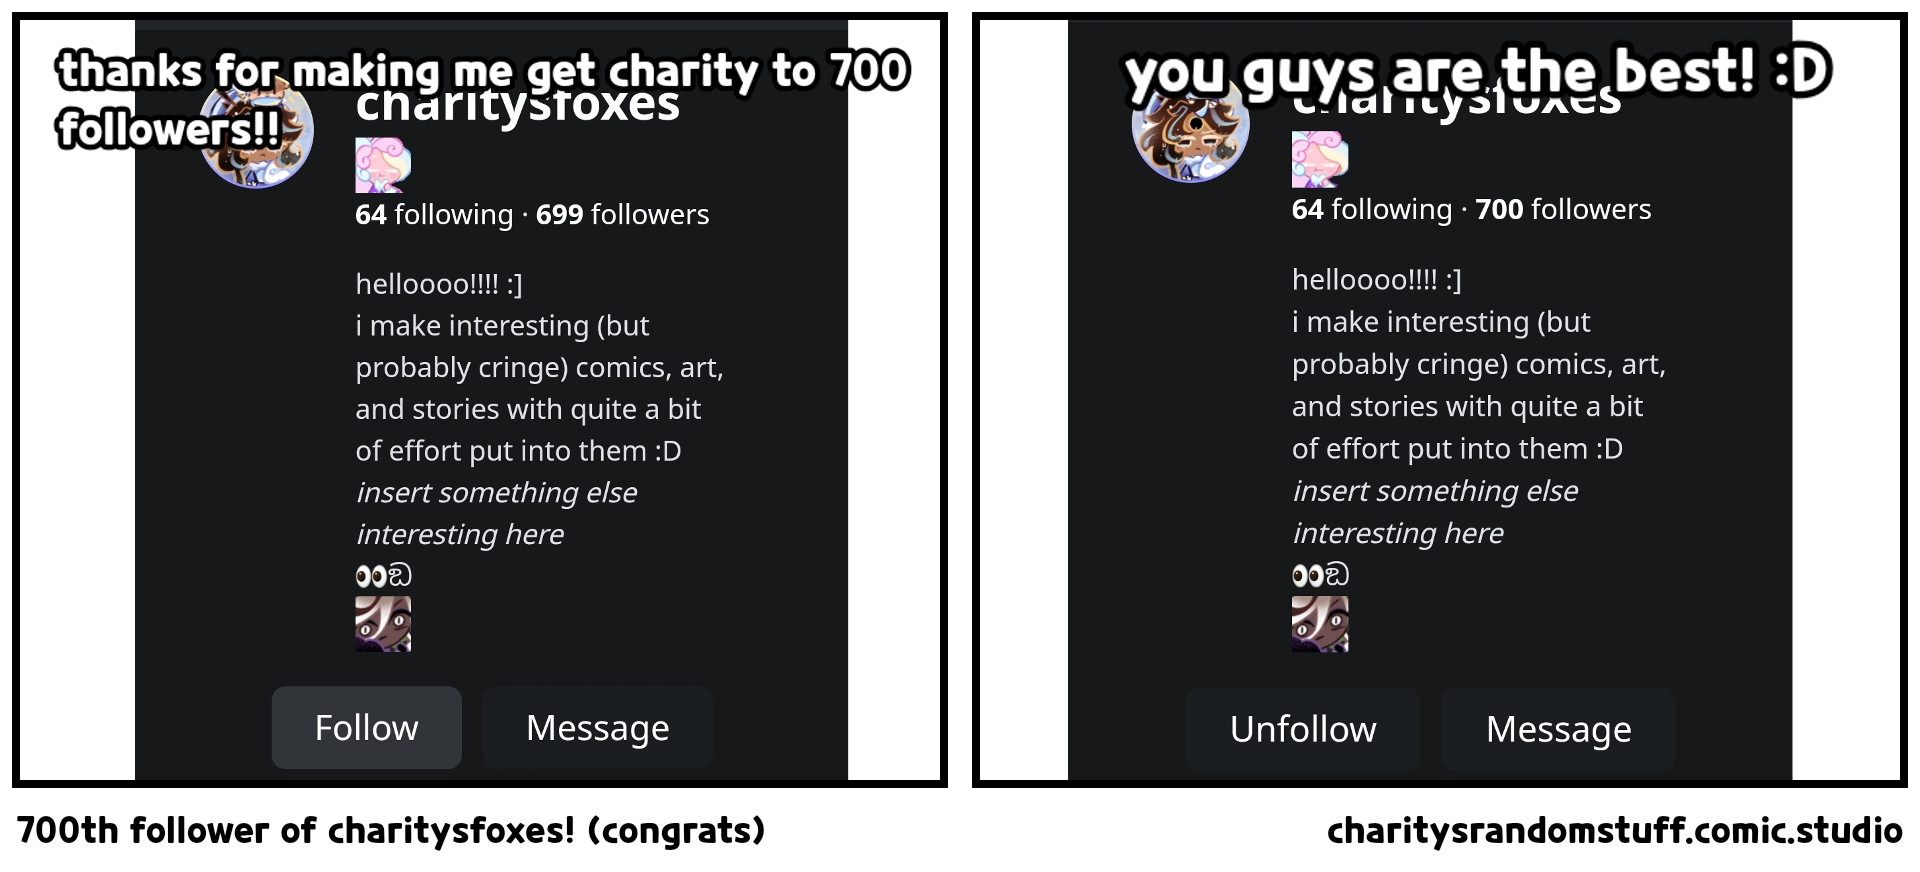 700th follower of charitysfoxes! (congrats)